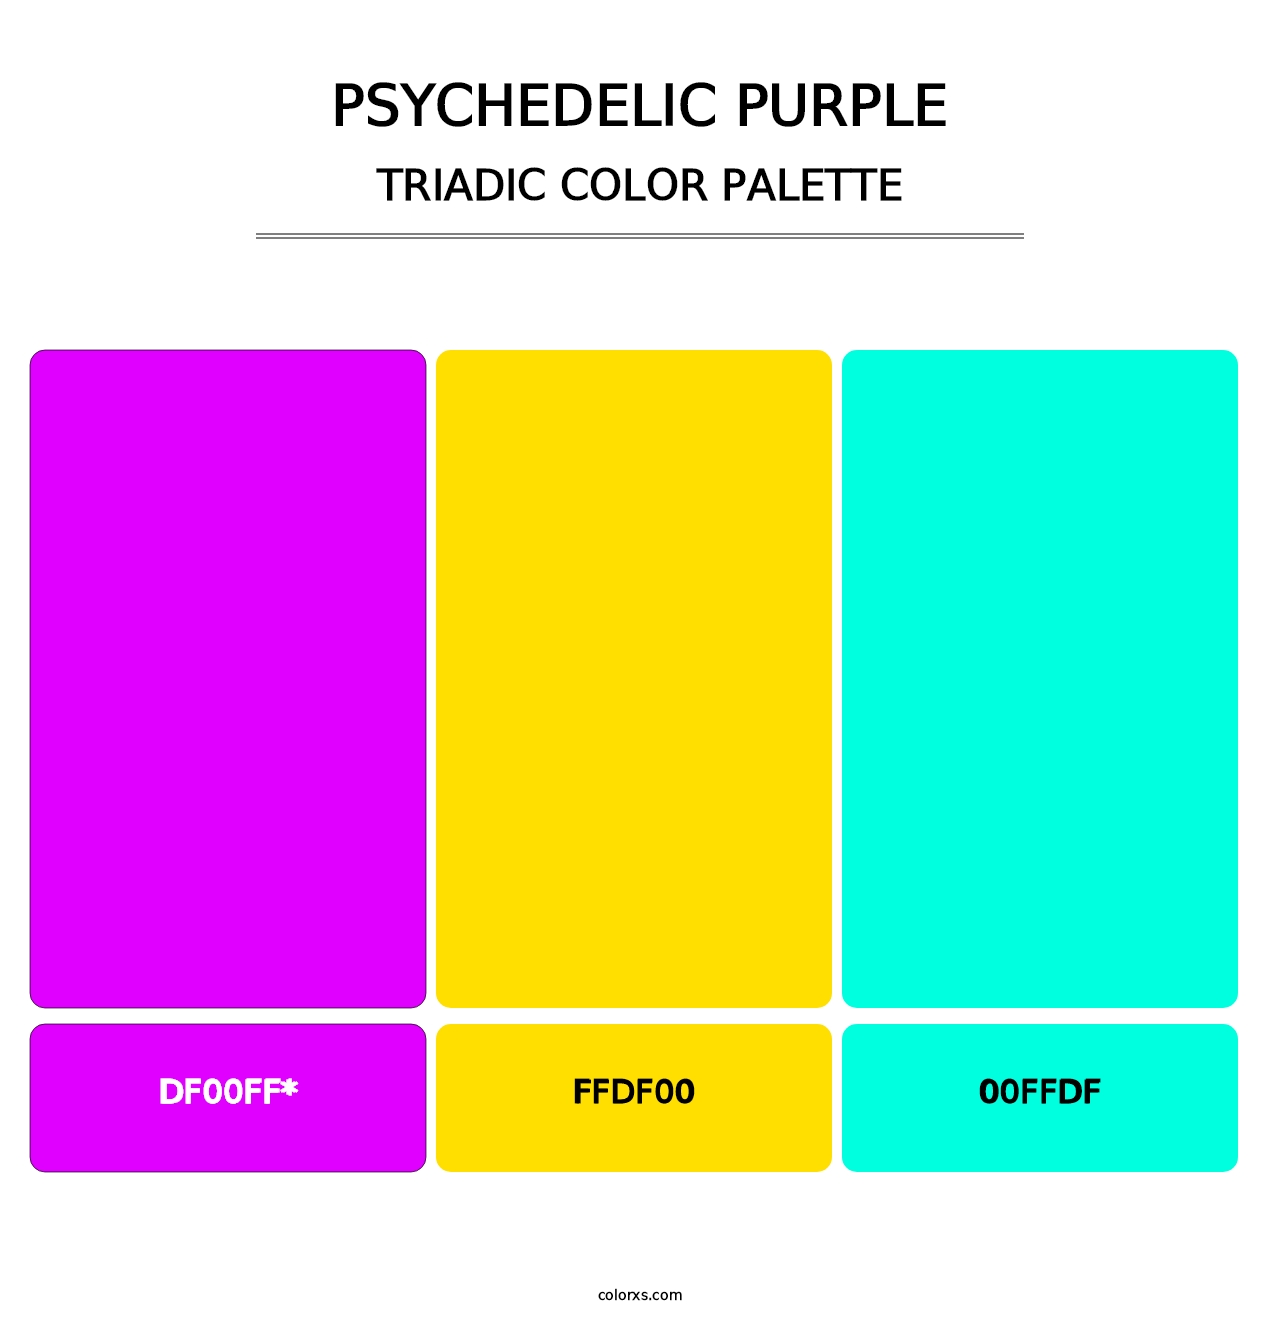 Psychedelic Purple - Triadic Color Palette